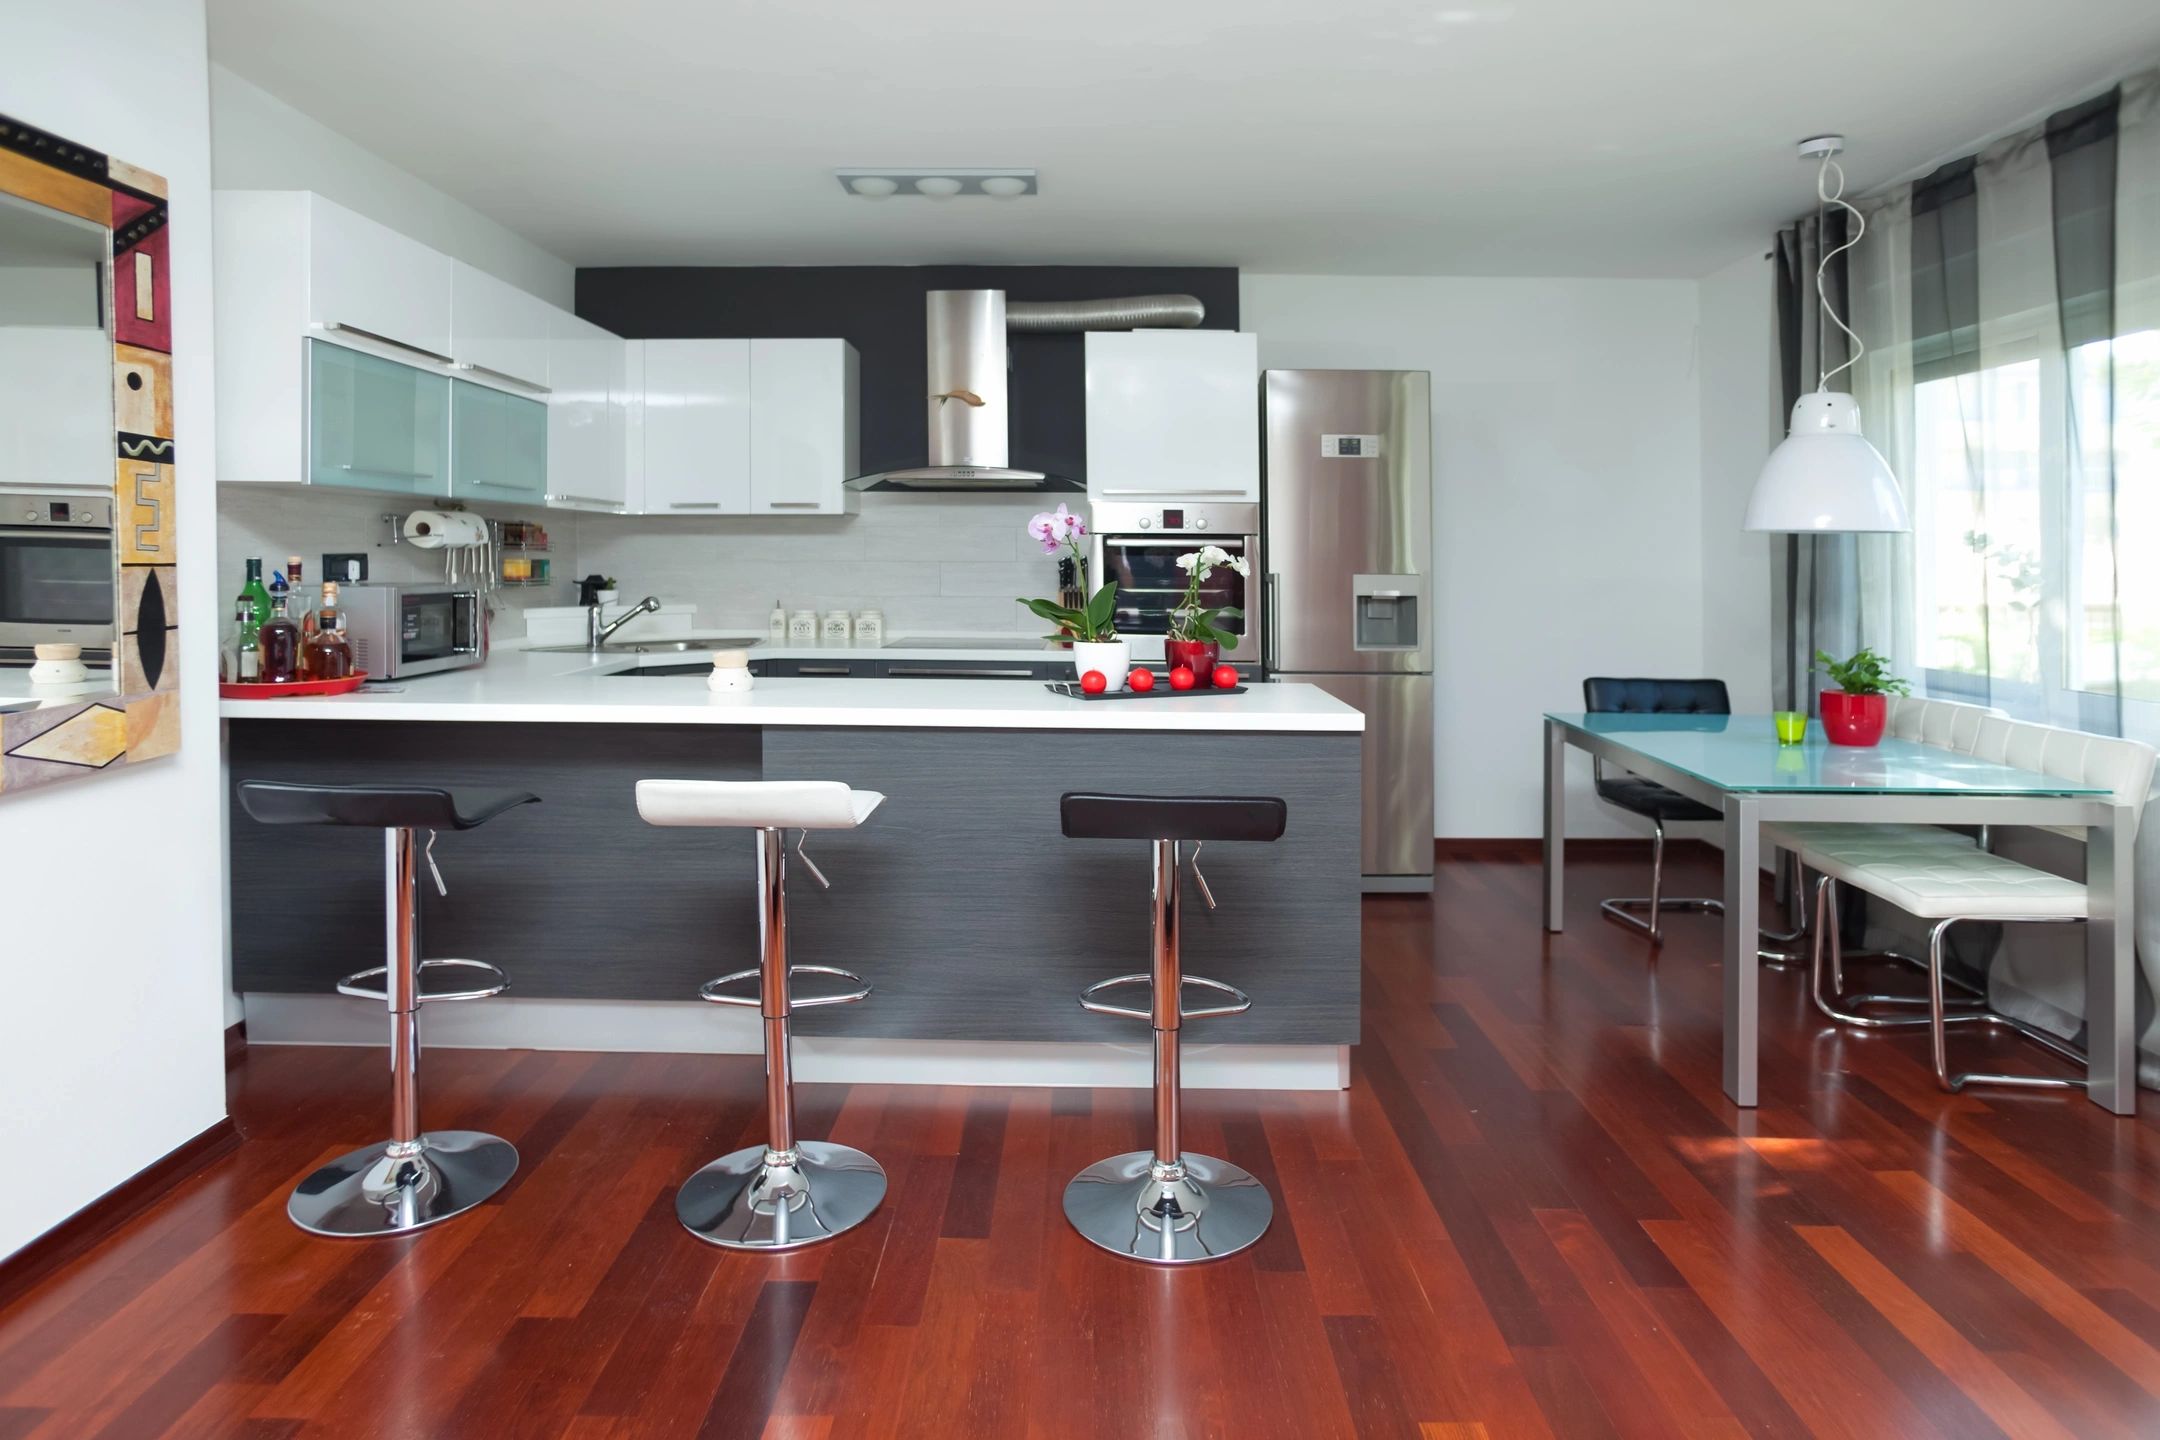 The kitchen is where we clean all surfaces with floors and all stand free equipment.